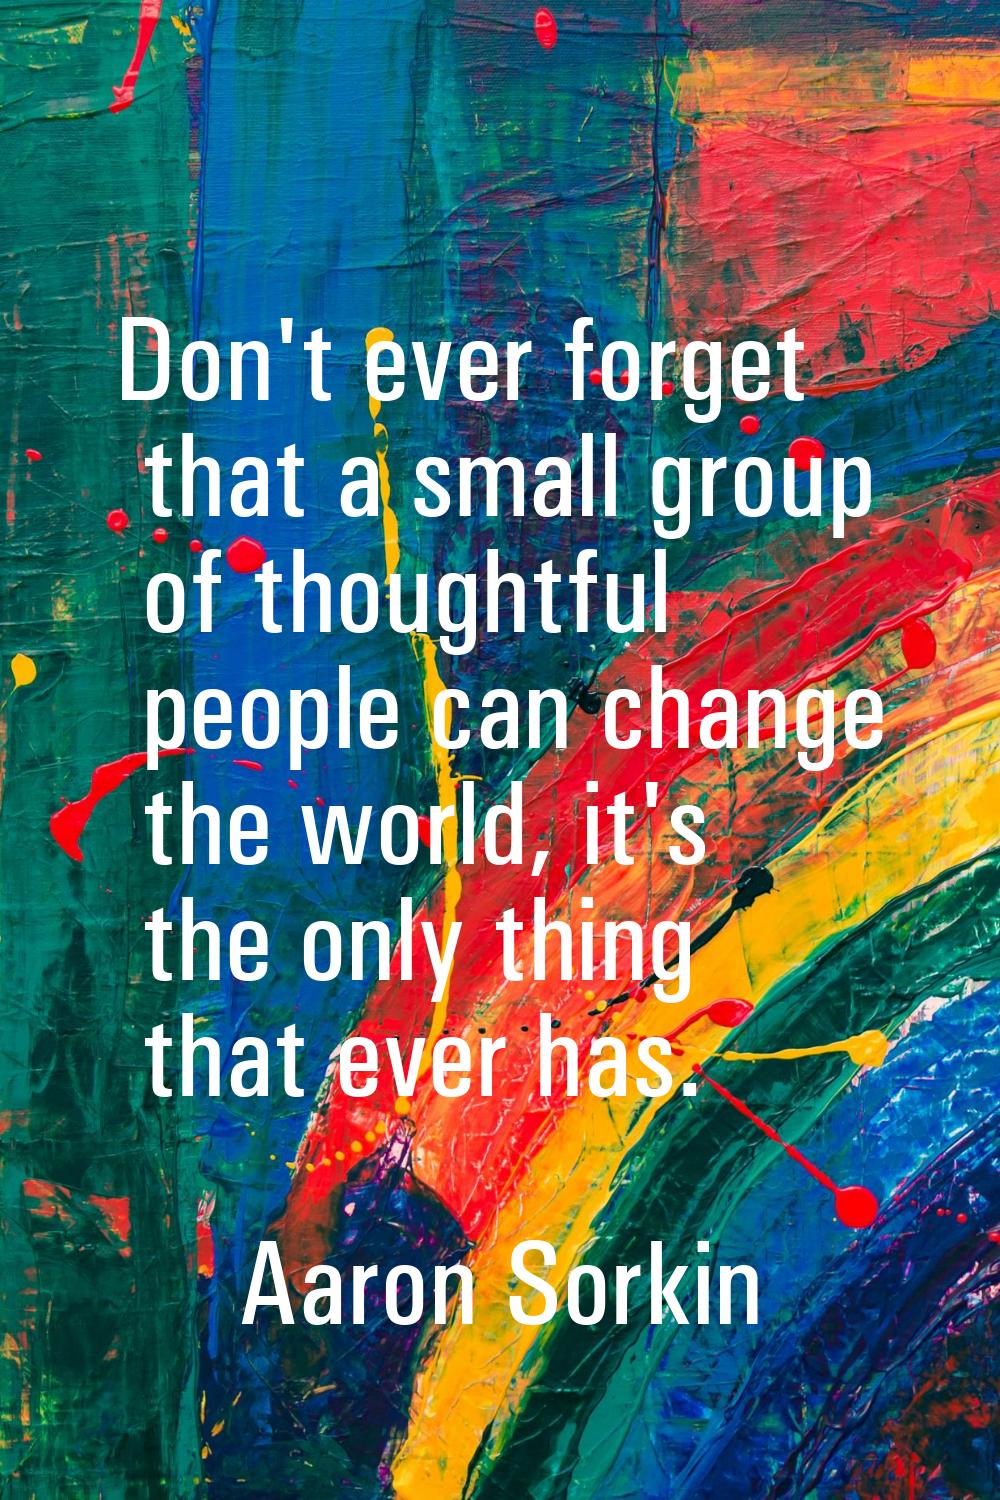 Don't ever forget that a small group of thoughtful people can change the world, it's the only thing